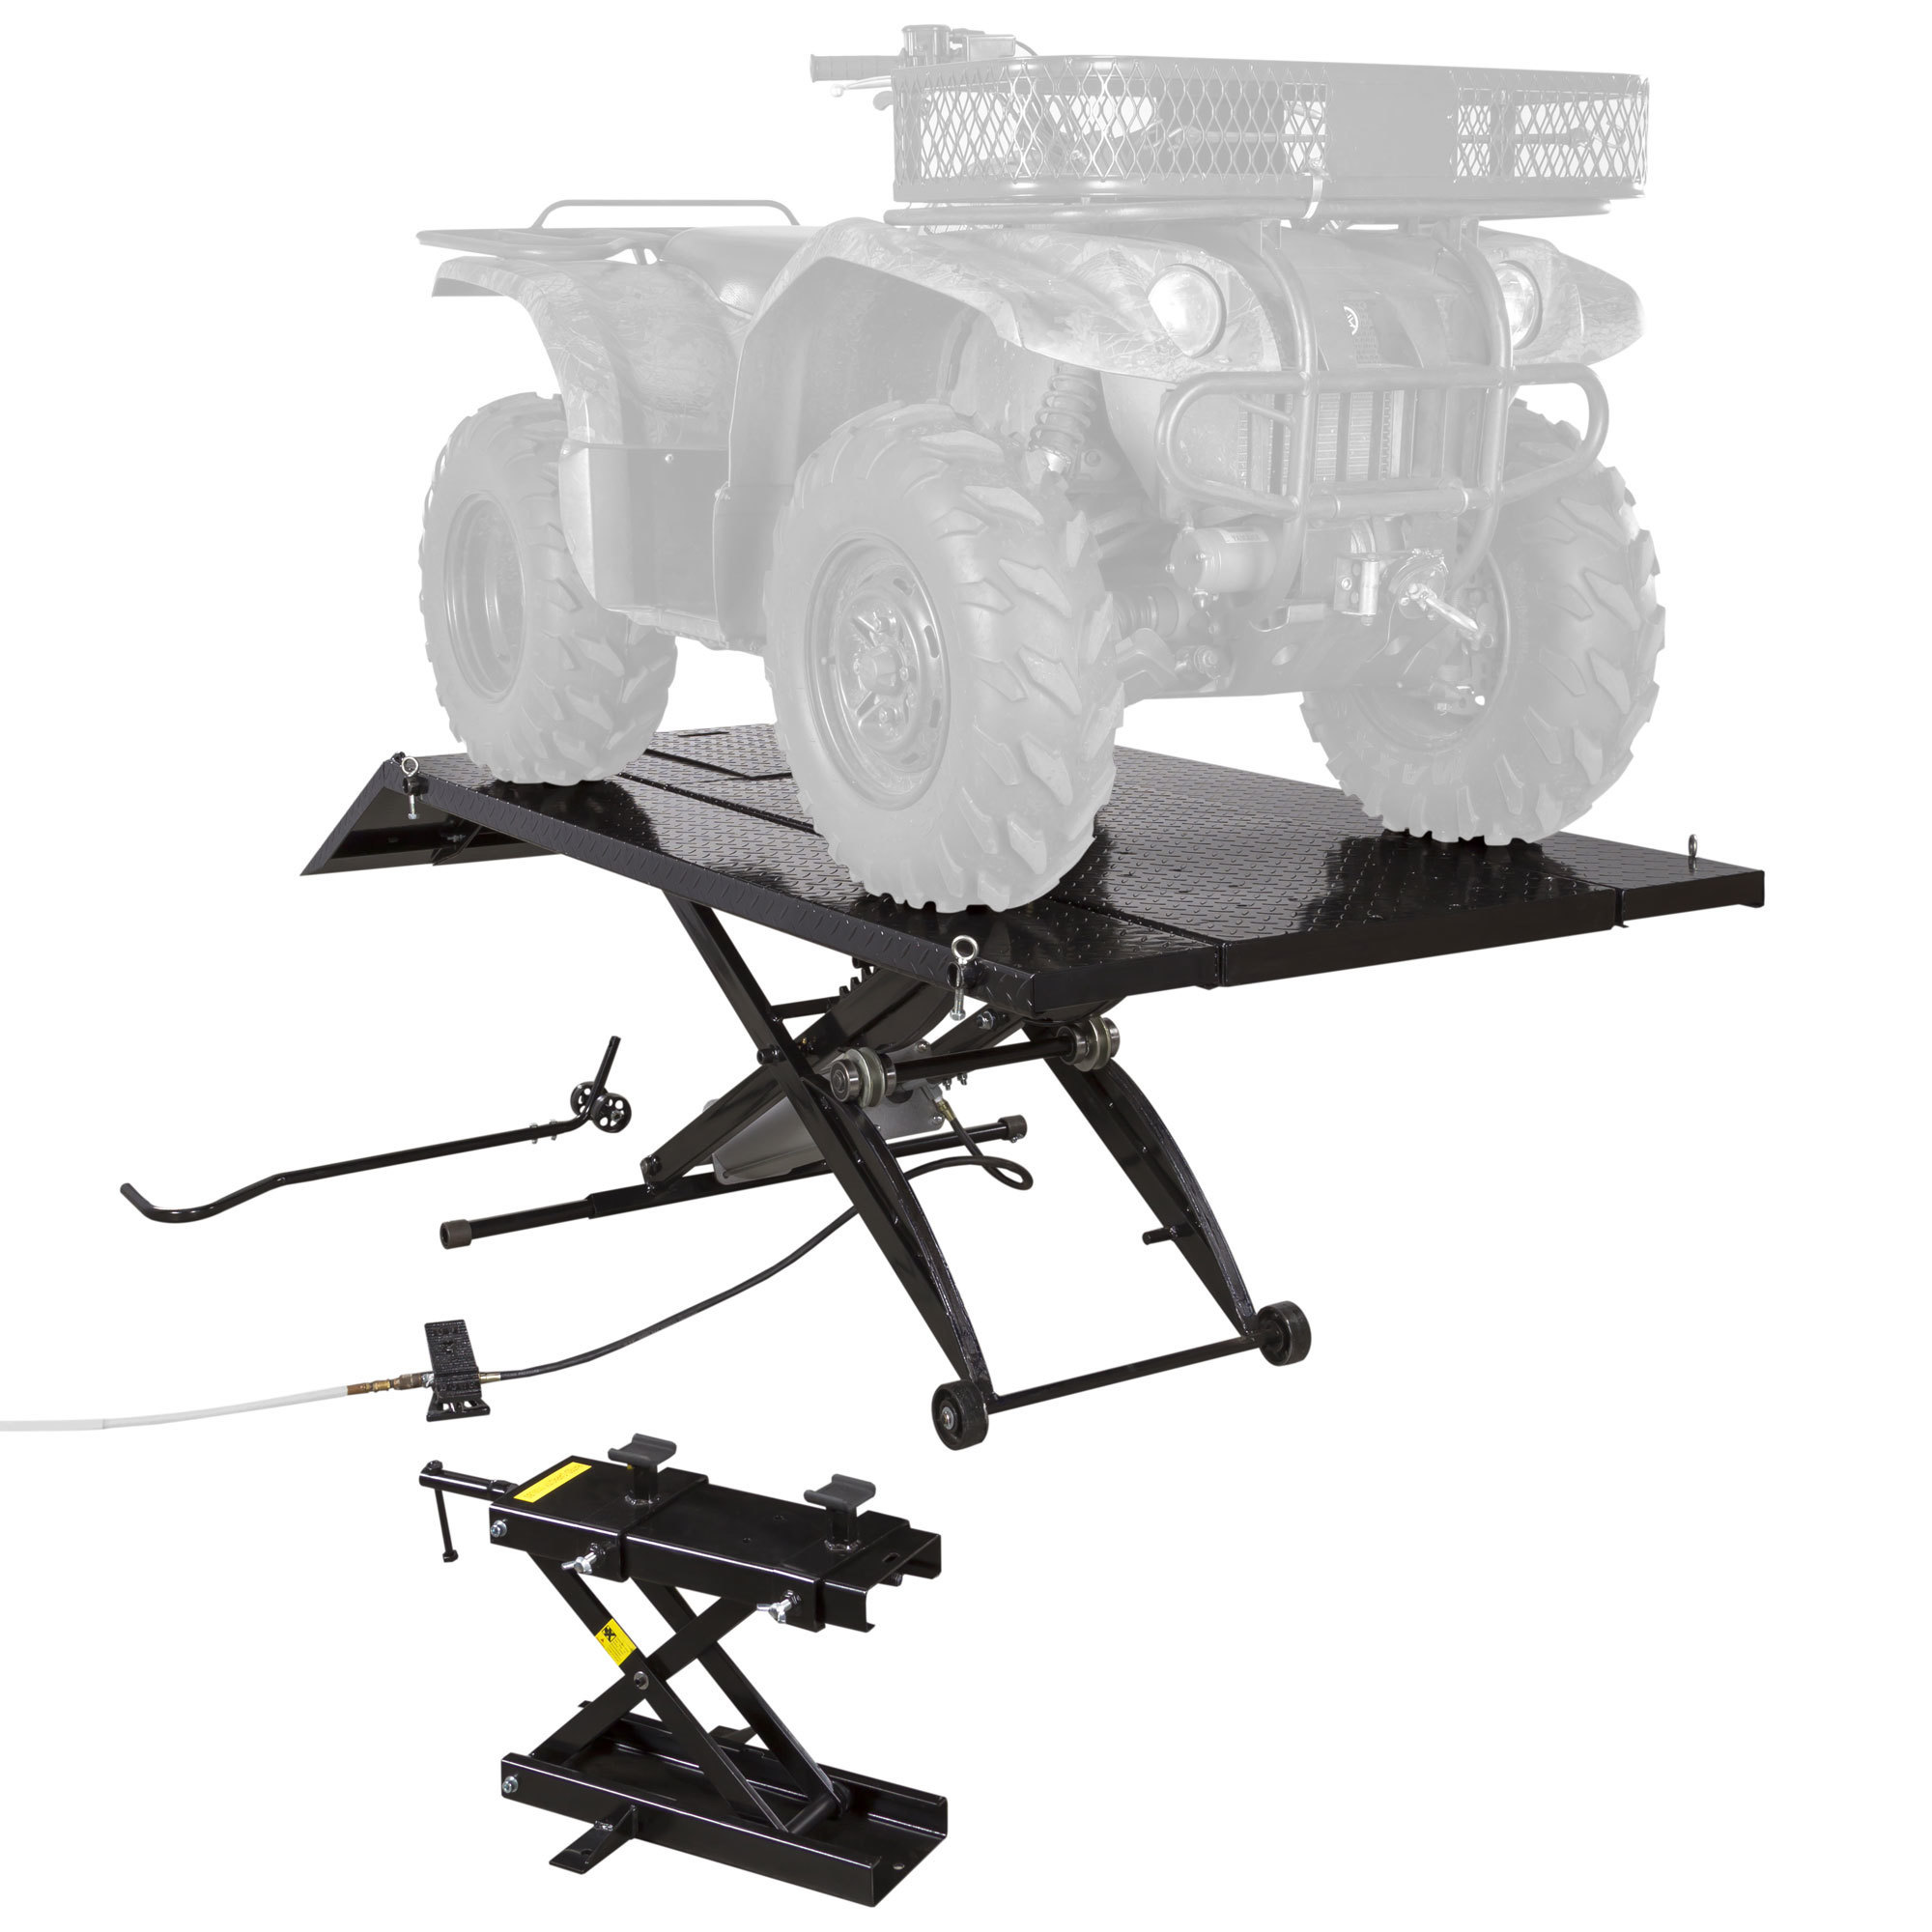 Black Widow, Extra Wide Pneumatic ATV Lift Table - 1000 lbs., Capacity 1000 lb, Max. Lift Range 33 in, Material Steel, Model BW-1000A-XW-ATV